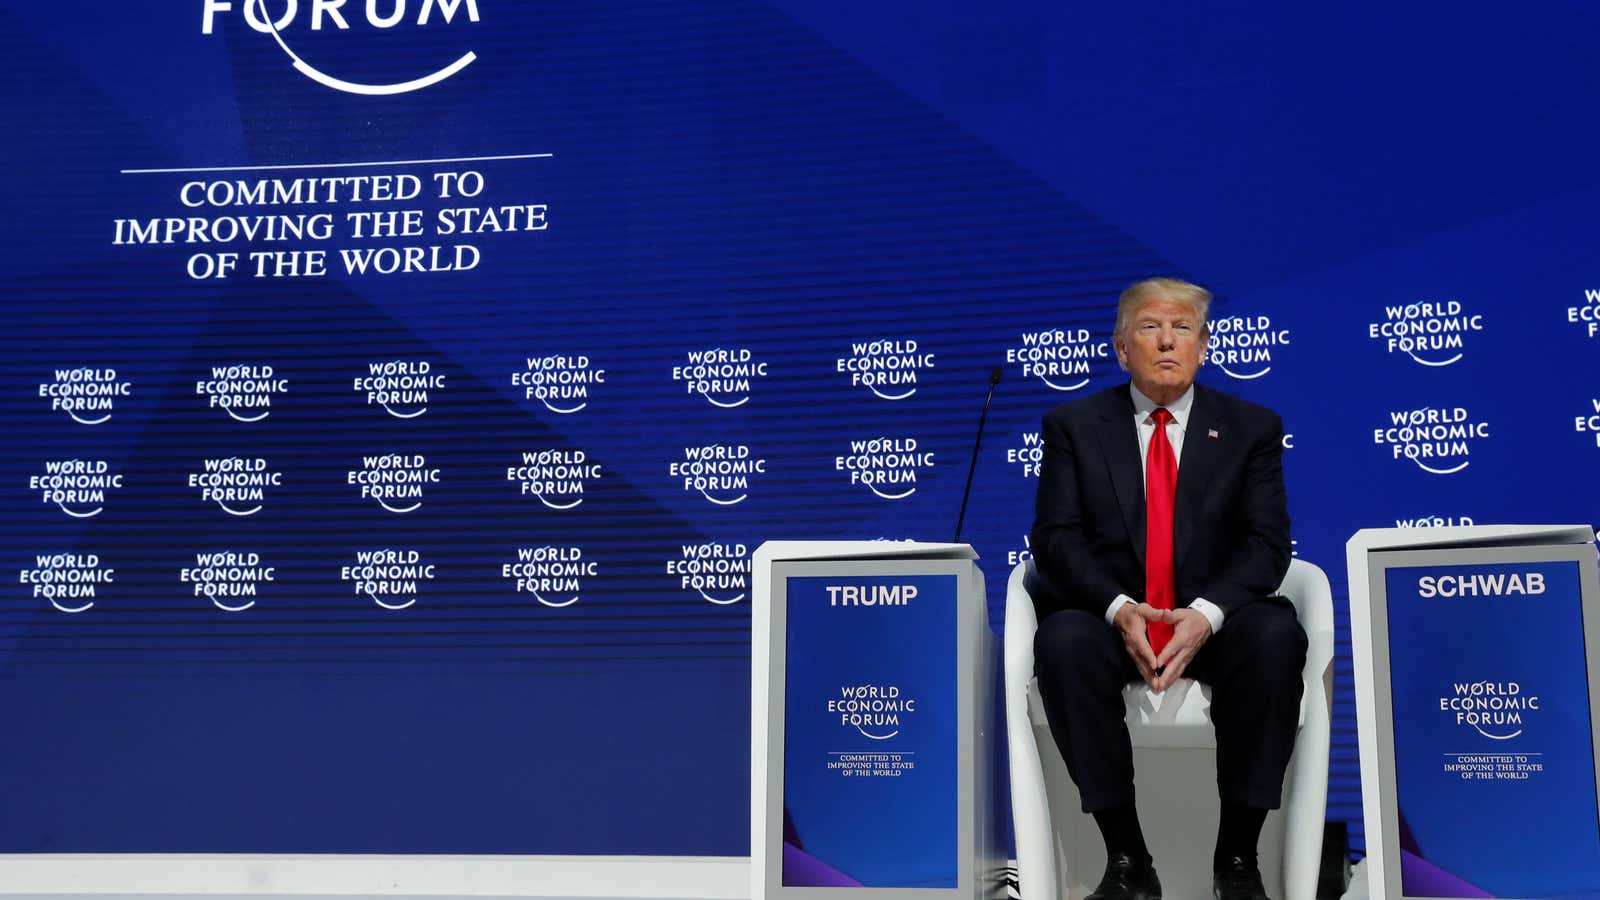 The 2020 World Economic Forum will mark US president Donald Trump’s second appearance at the exclusive confab.